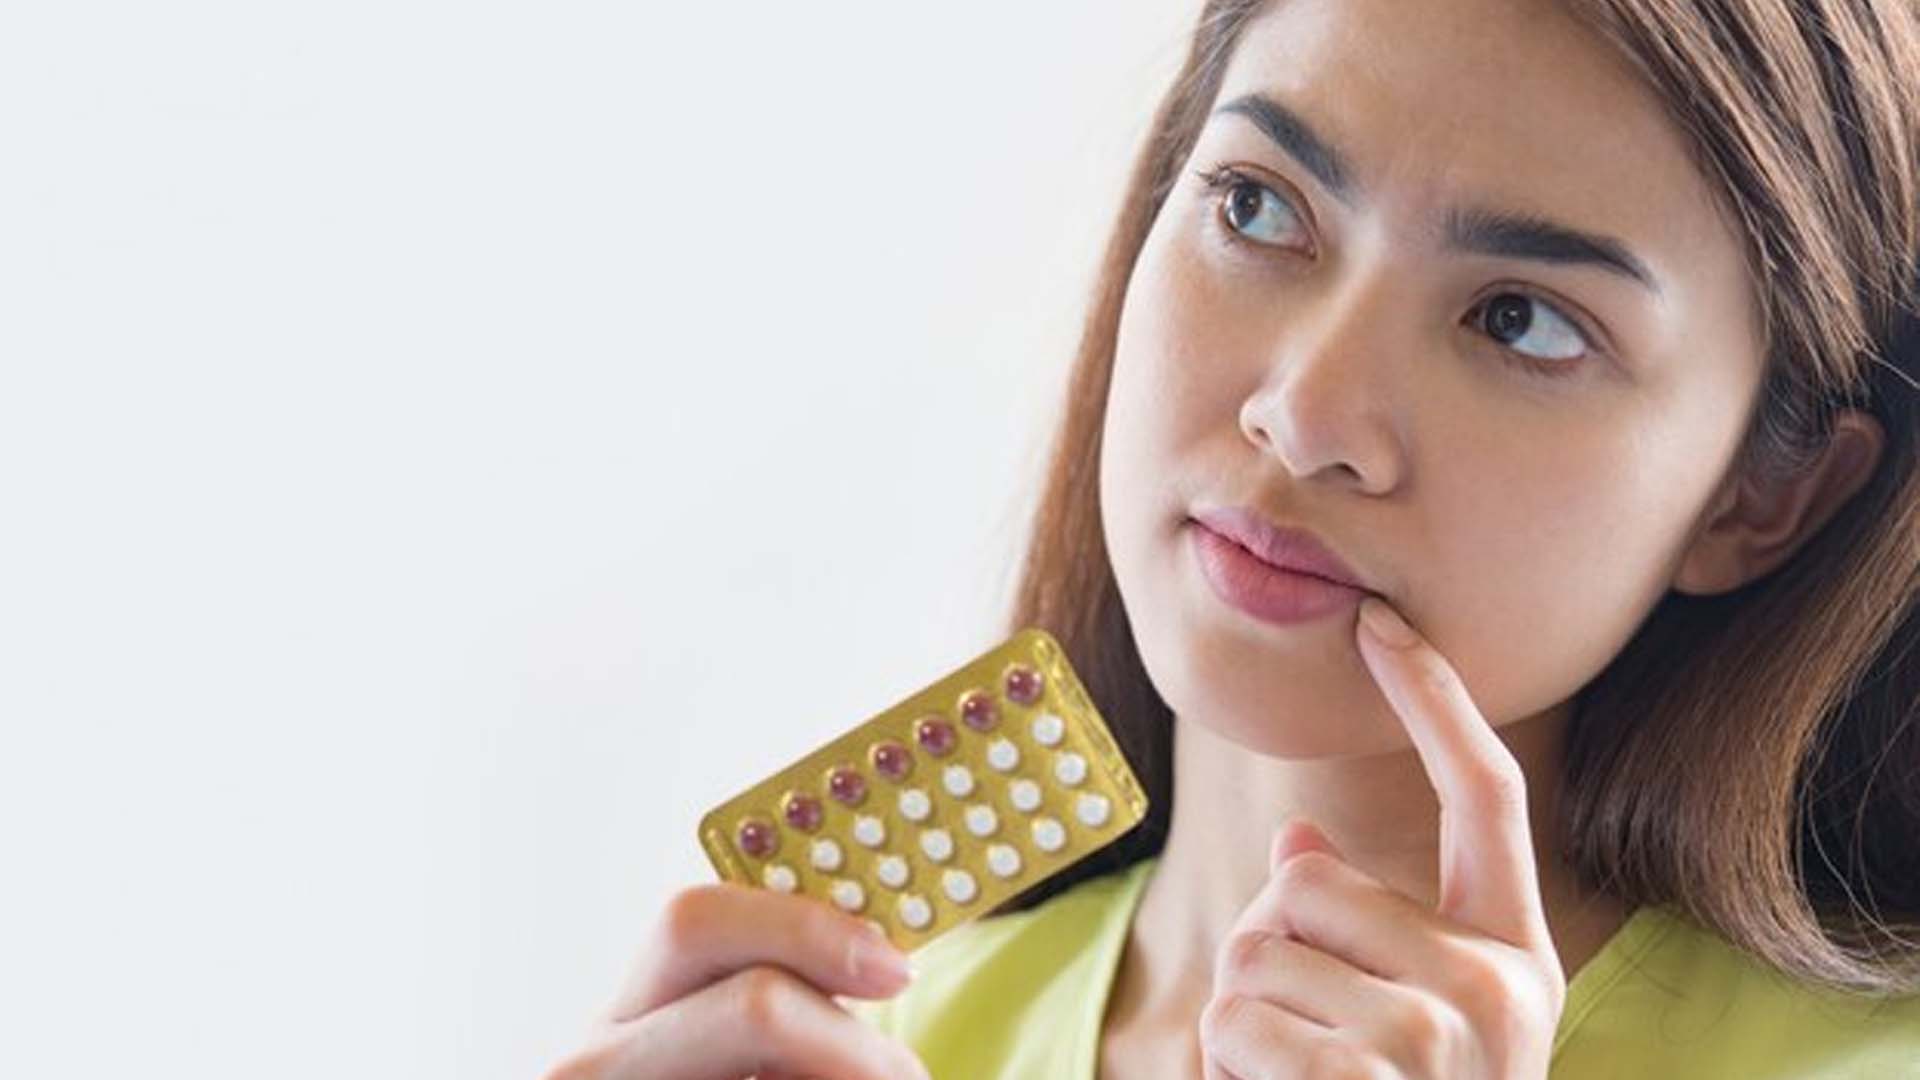 Women Holding contraceptive Pills and Thinking